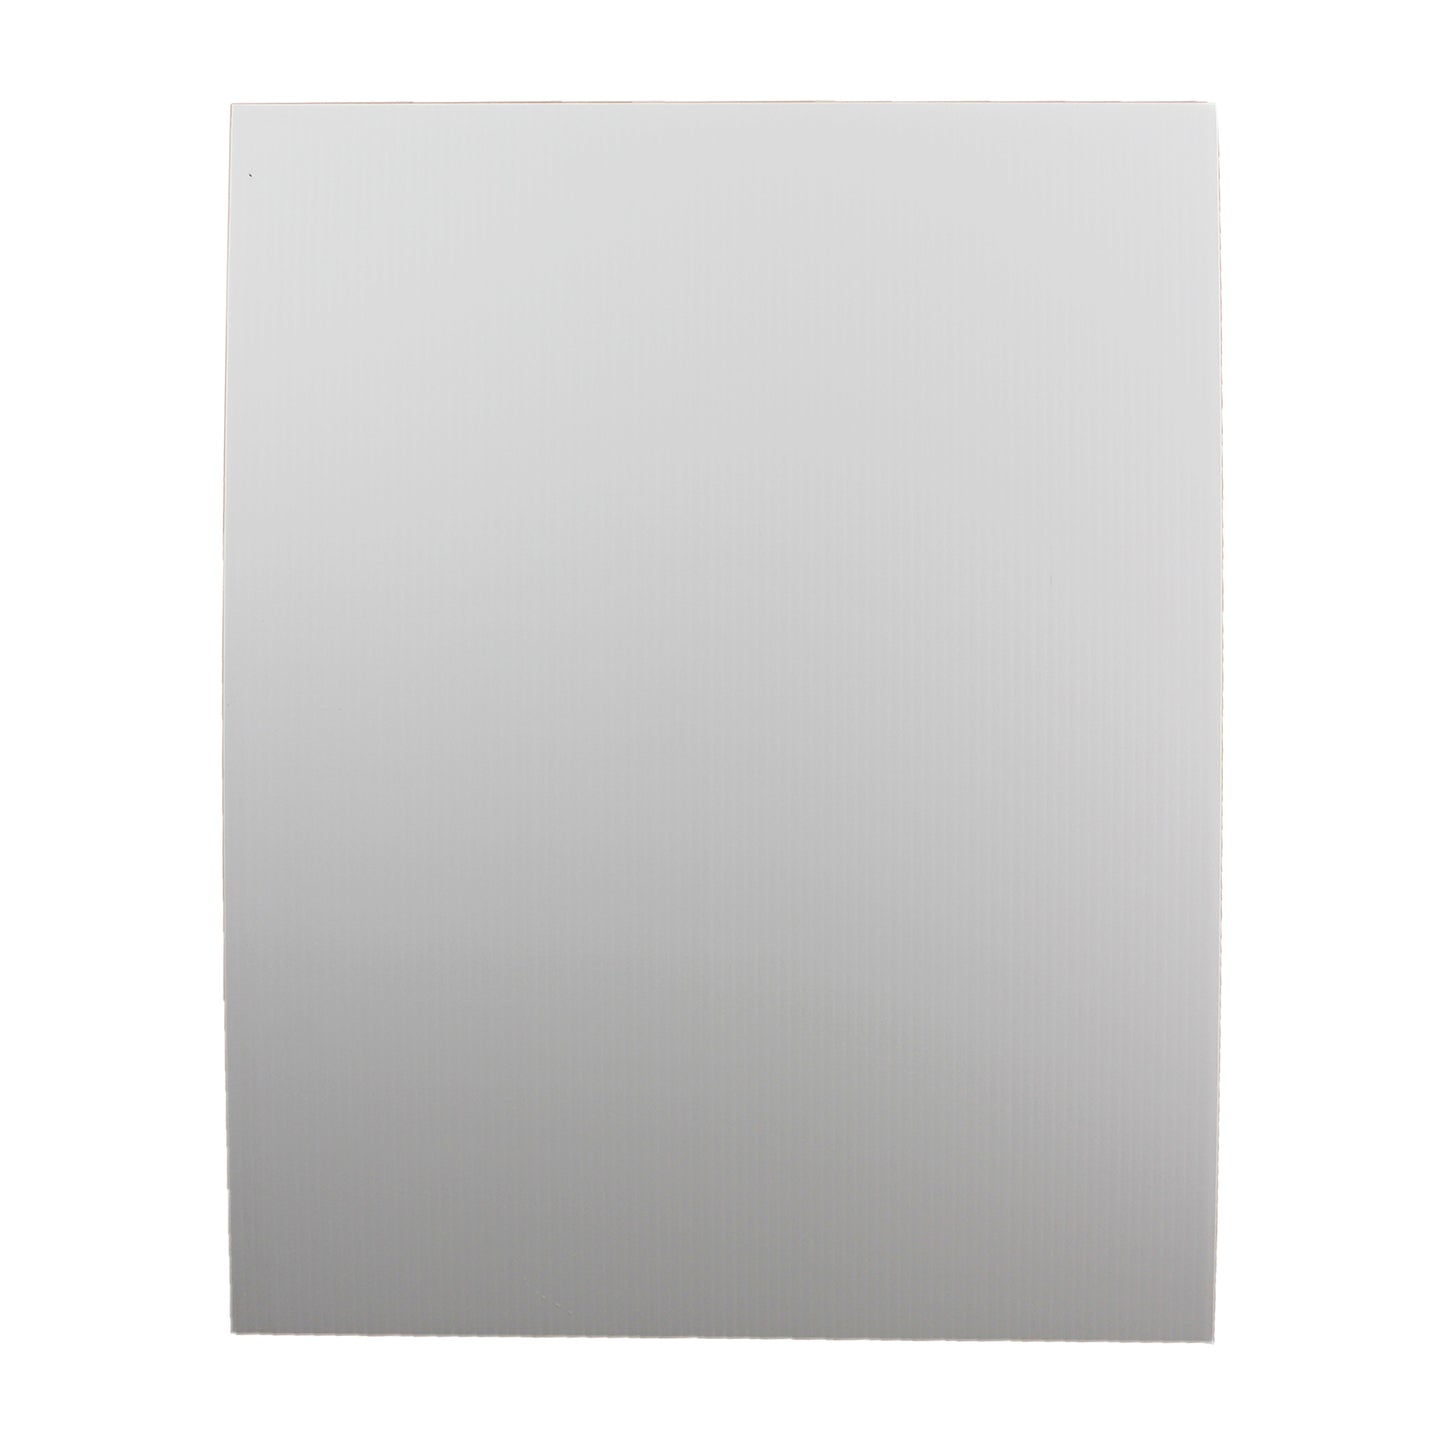 Premium Project Sheet White, 20 x 28, Pack of 10